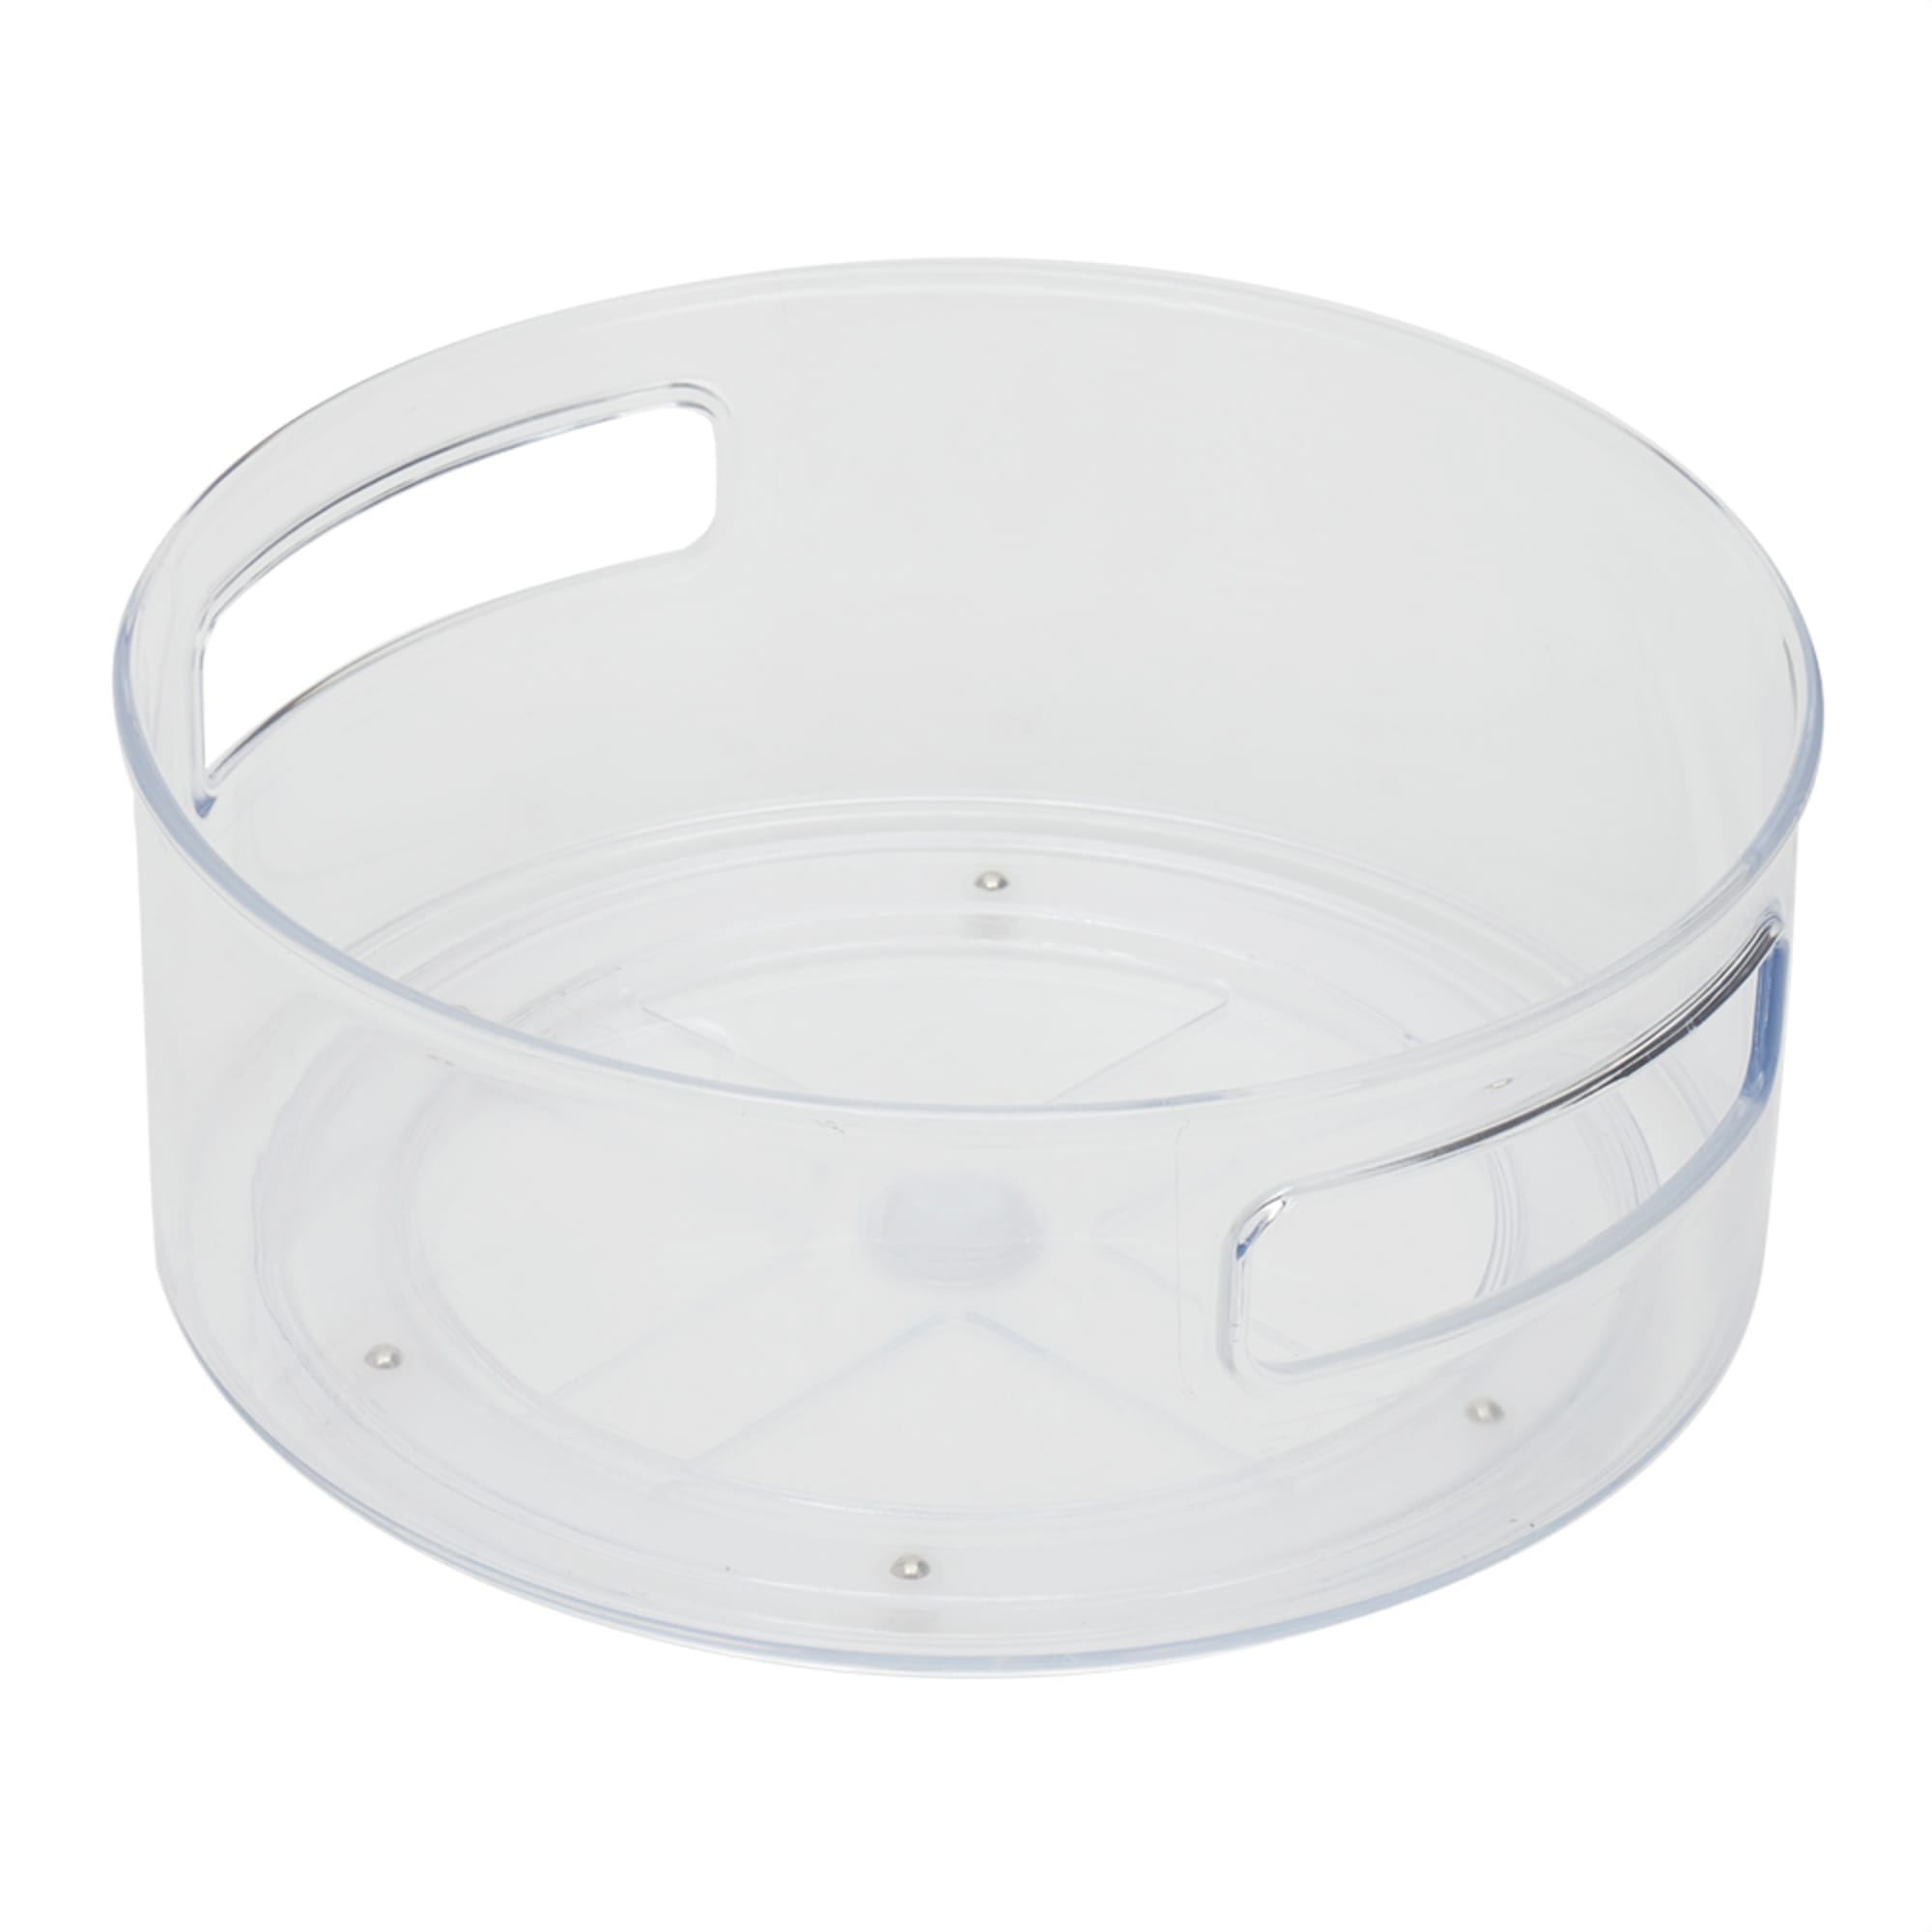 Home Basics Clear Plastic Lazy Susan $4.00 EACH, CASE PACK OF 12